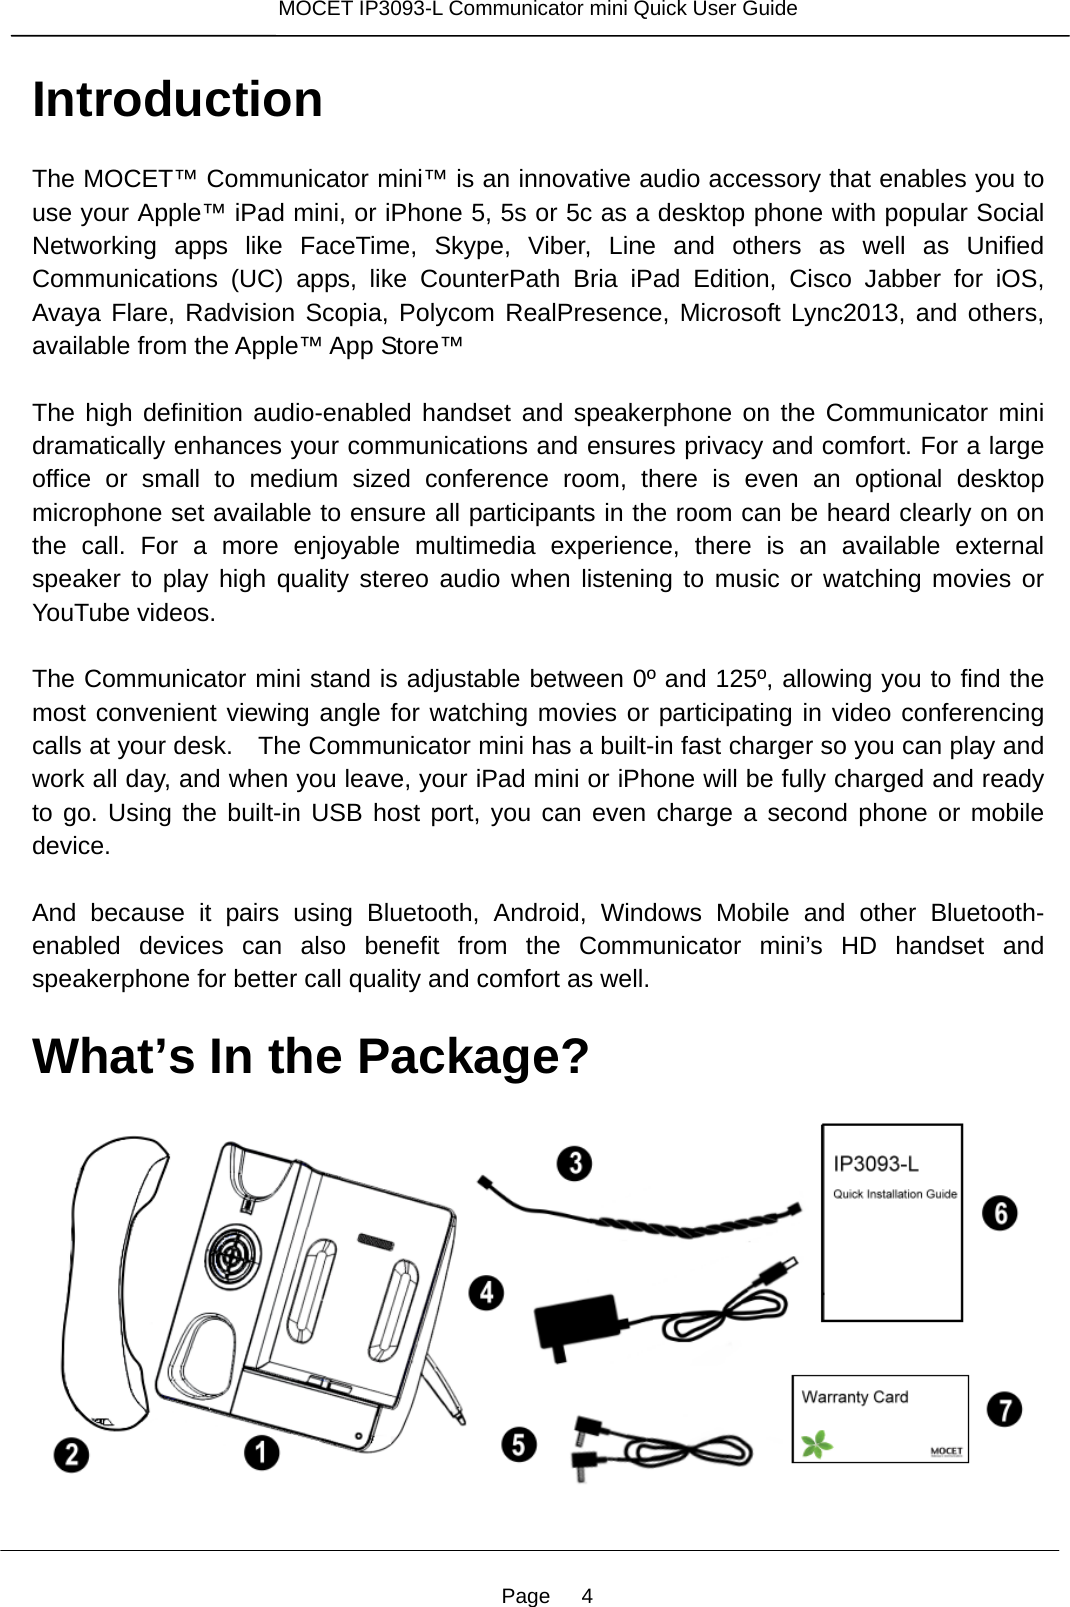 Page   4 MOCET IP3093-L Communicator mini Quick User Guide  Introduction The MOCET™ Communicator mini™ is an innovative audio accessory that enables you to use your Apple™ iPad mini, or iPhone 5, 5s or 5c as a desktop phone with popular Social Networking apps like FaceTime, Skype, Viber, Line and others as well as Unified Communications (UC) apps, like CounterPath Bria iPad Edition, Cisco Jabber for iOS, Avaya Flare, Radvision Scopia, Polycom RealPresence, Microsoft Lync2013, and others, available from the Apple™ App Store™  The high definition audio-enabled handset and speakerphone on the Communicator mini dramatically enhances your communications and ensures privacy and comfort. For a large office or small to medium sized conference room, there is even an optional desktop microphone set available to ensure all participants in the room can be heard clearly on on the call. For a more enjoyable multimedia experience, there is an available external speaker to play high quality stereo audio when listening to music or watching movies or YouTube videos.  The Communicator mini stand is adjustable between 0º and 125º, allowing you to find the most convenient viewing angle for watching movies or participating in video conferencing calls at your desk.    The Communicator mini has a built-in fast charger so you can play and work all day, and when you leave, your iPad mini or iPhone will be fully charged and ready to go. Using the built-in USB host port, you can even charge a second phone or mobile device.  And because it pairs using Bluetooth, Android, Windows Mobile and other Bluetooth-enabled devices can also benefit from the Communicator mini’s HD handset and speakerphone for better call quality and comfort as well.  What’s In the Package?      